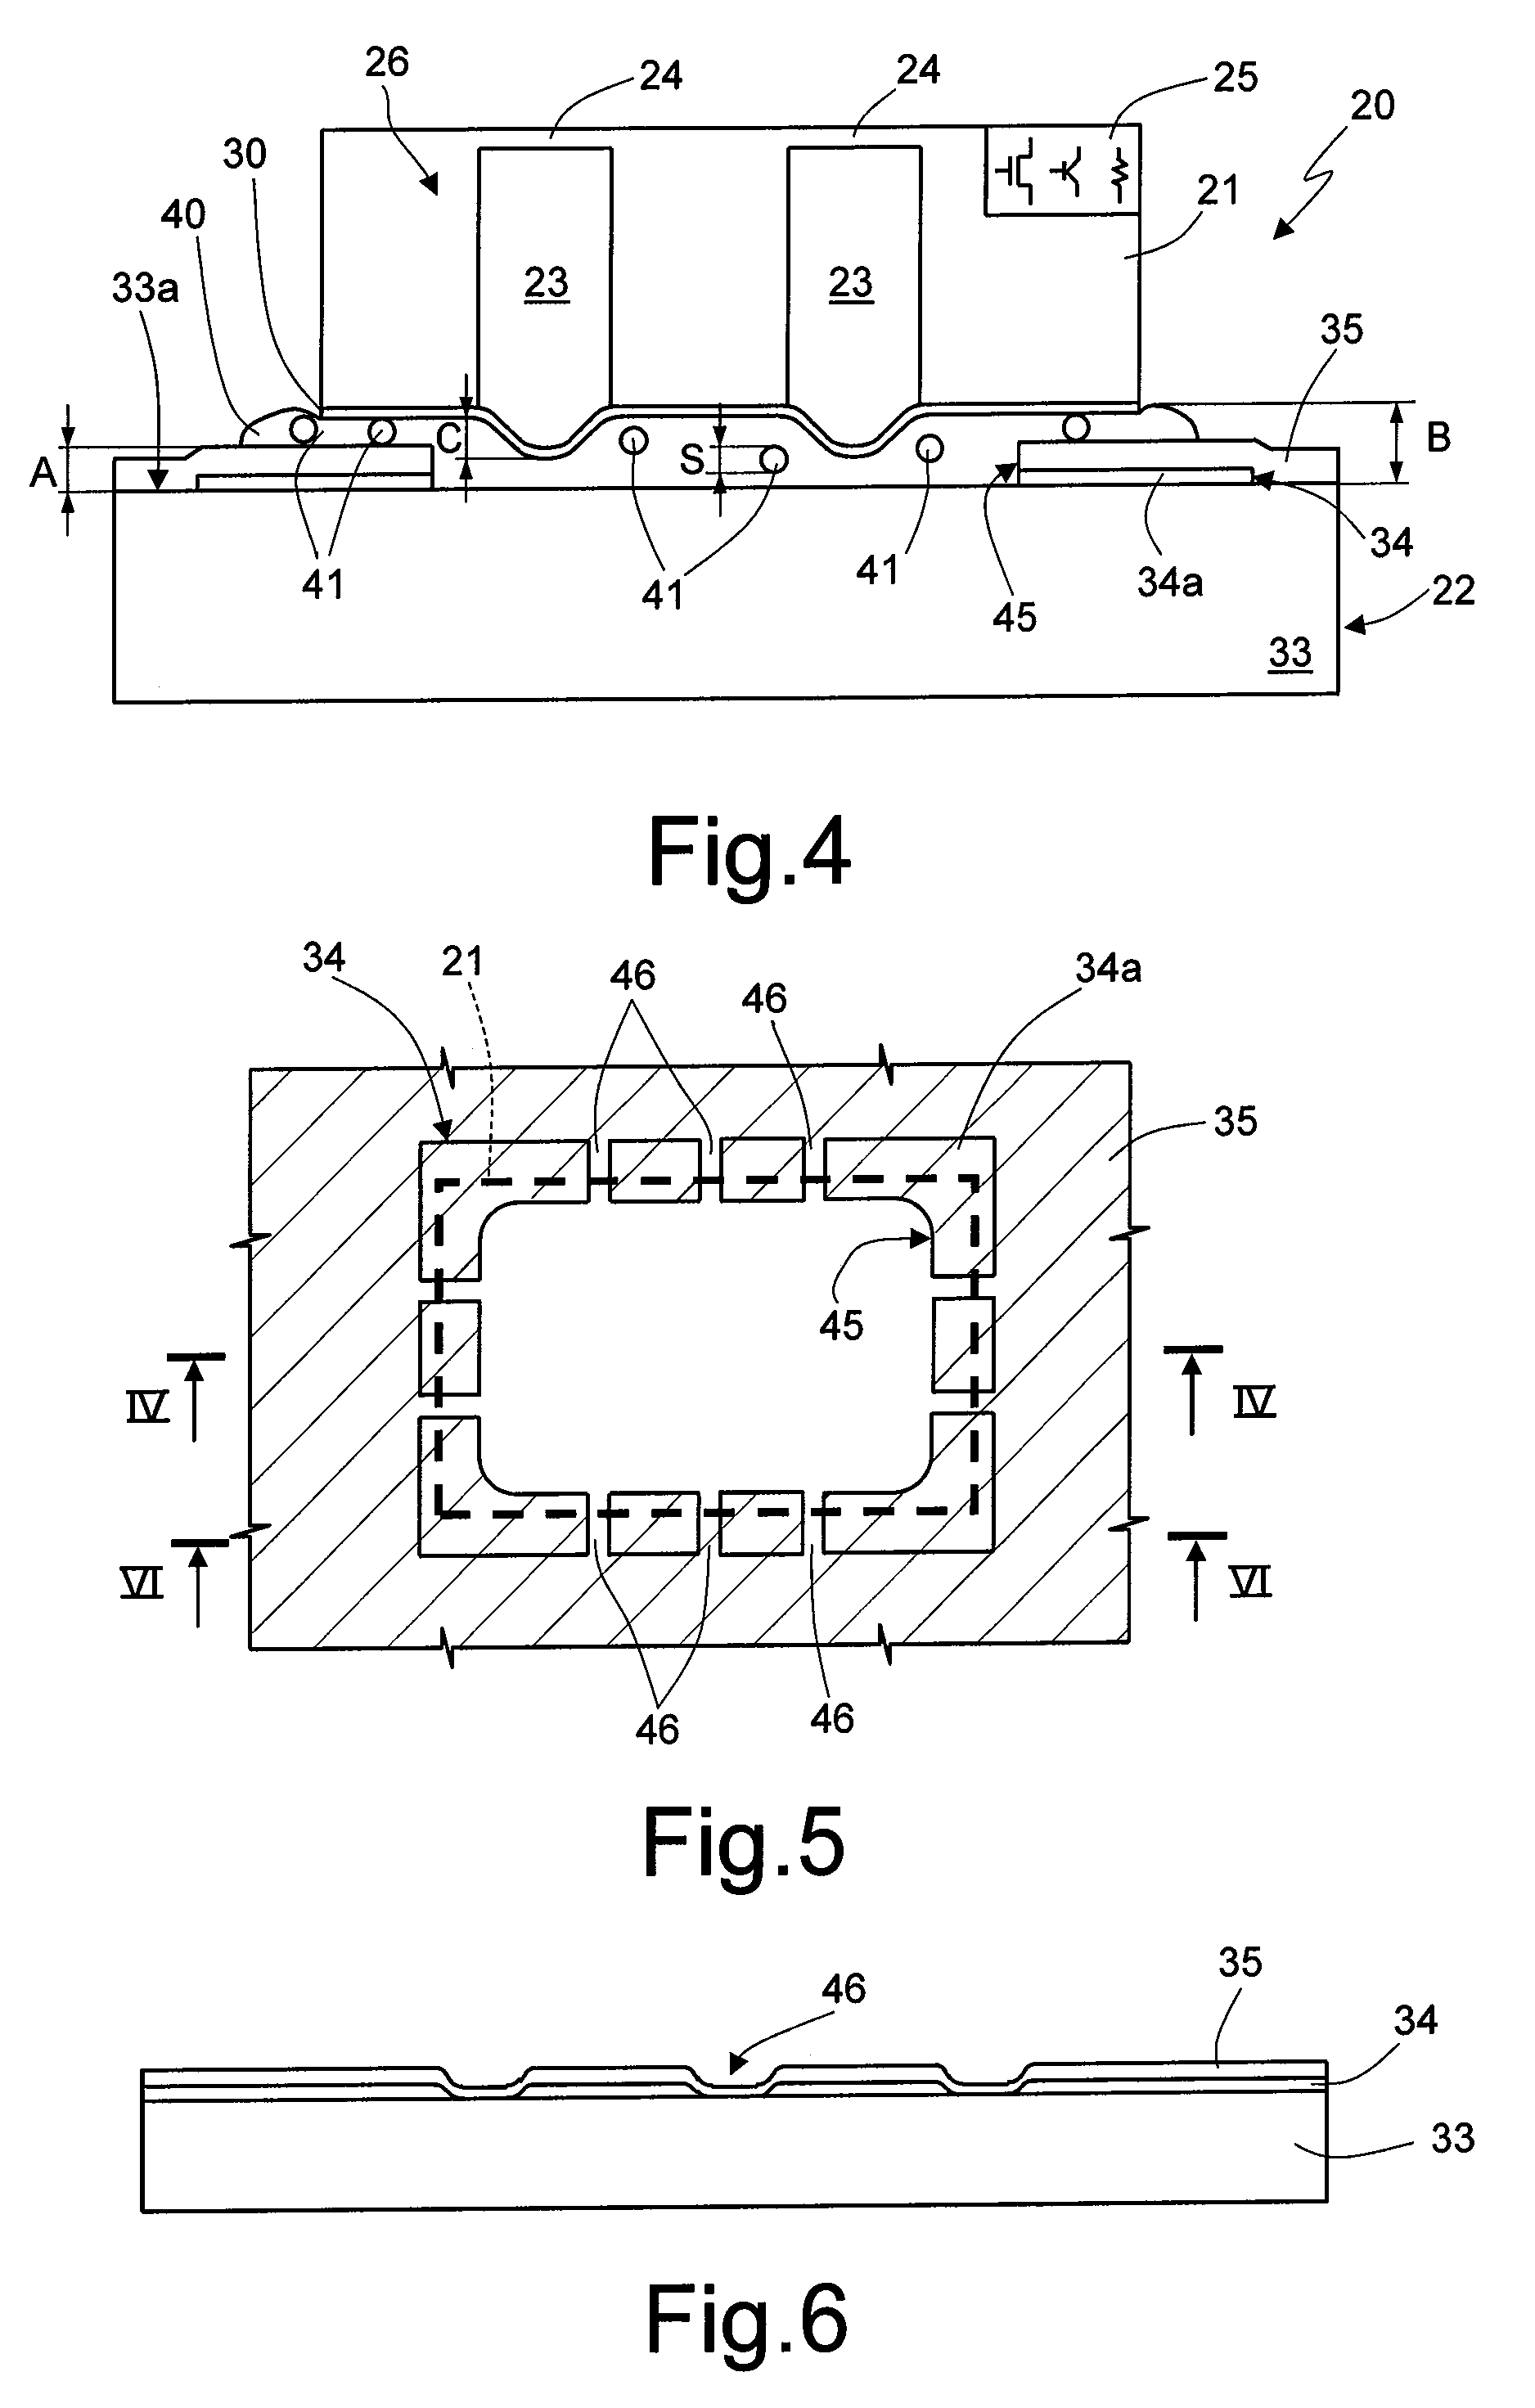 Electronic MEMS device comprising a chip bonded to a substrate and having cavities and manufacturing process thereof